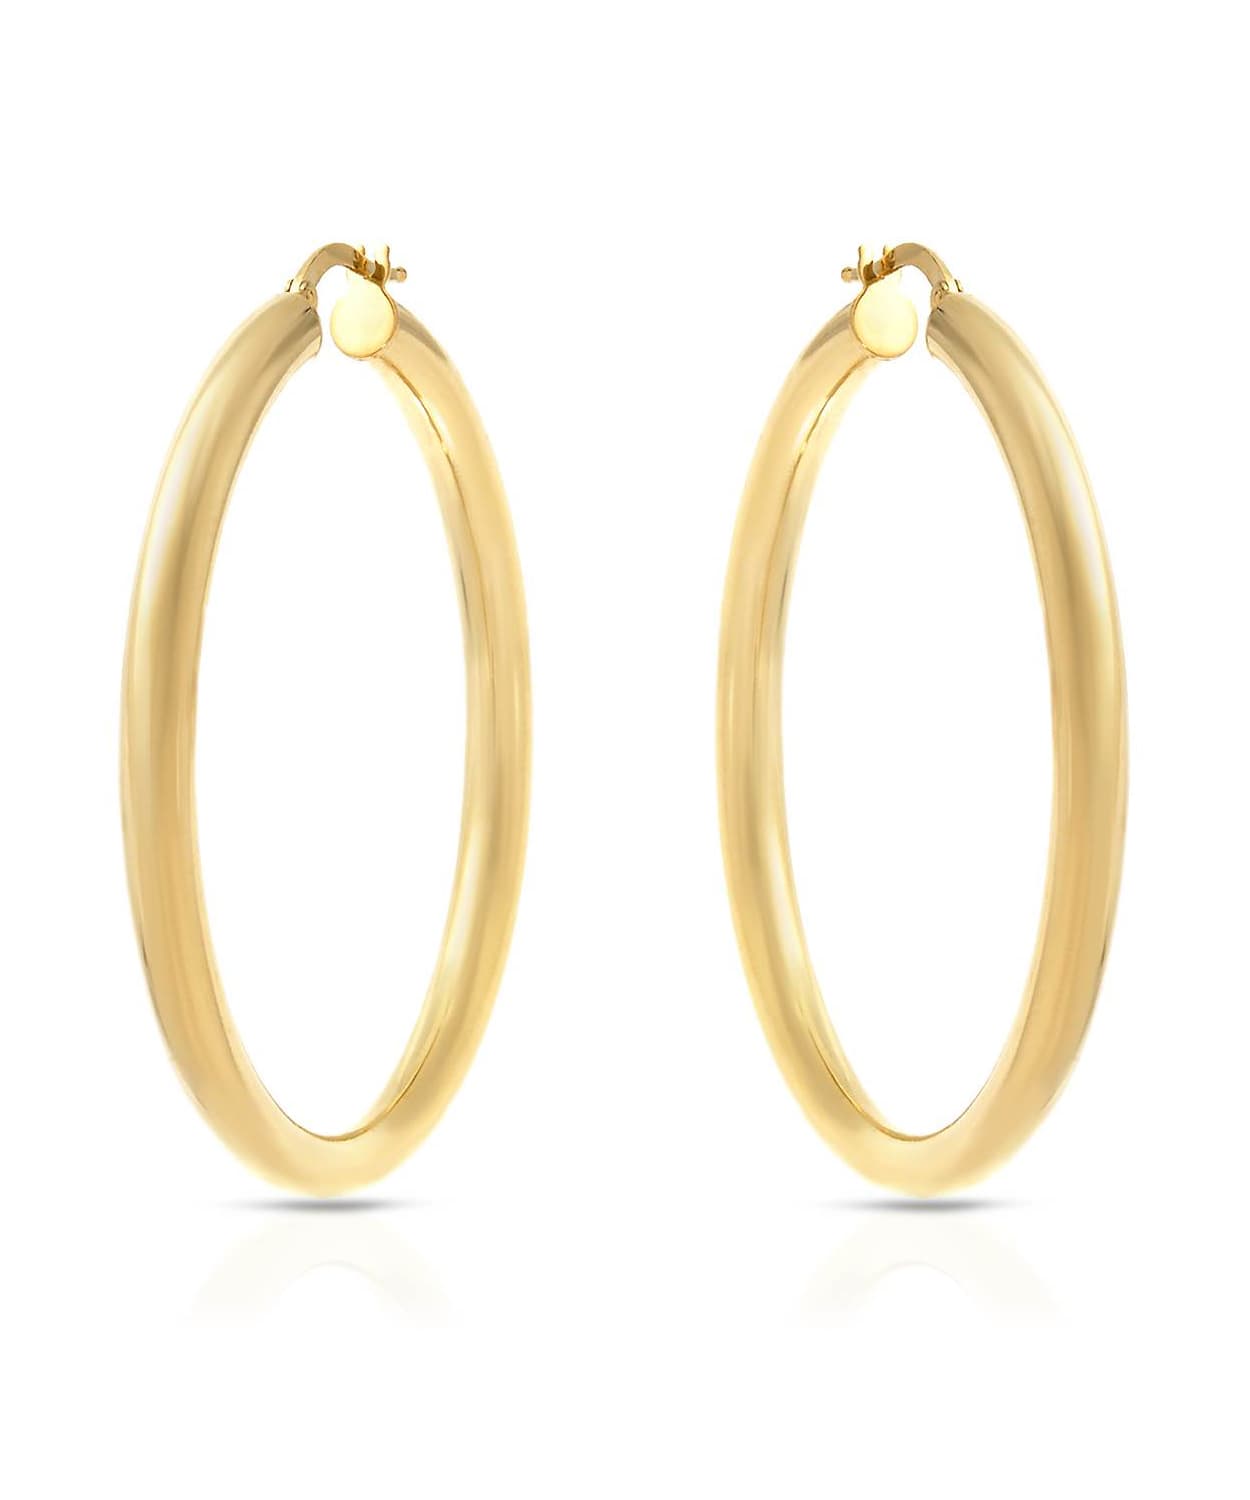 Esemco 48mm Large Solid 14k Yellow Gold Classic Hoop Earrings View 1